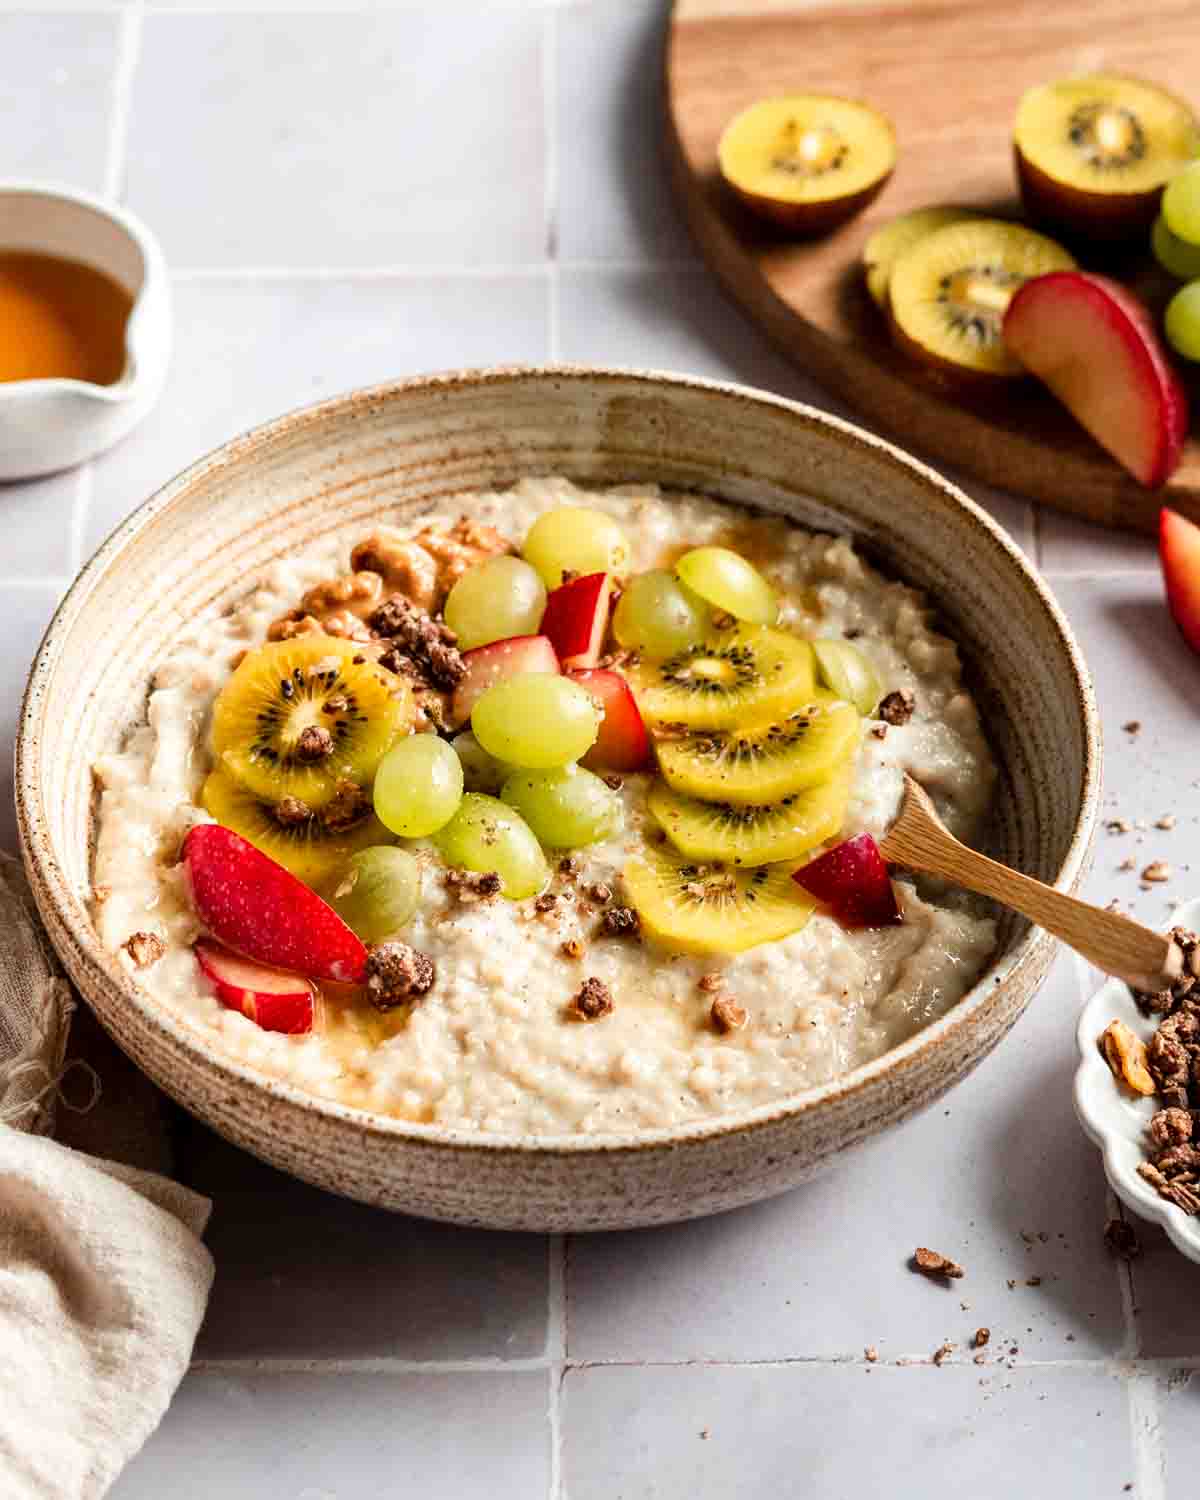 sorghum porridge in a bowl topped with fresh kiwis, plums, granola and maple syrup.